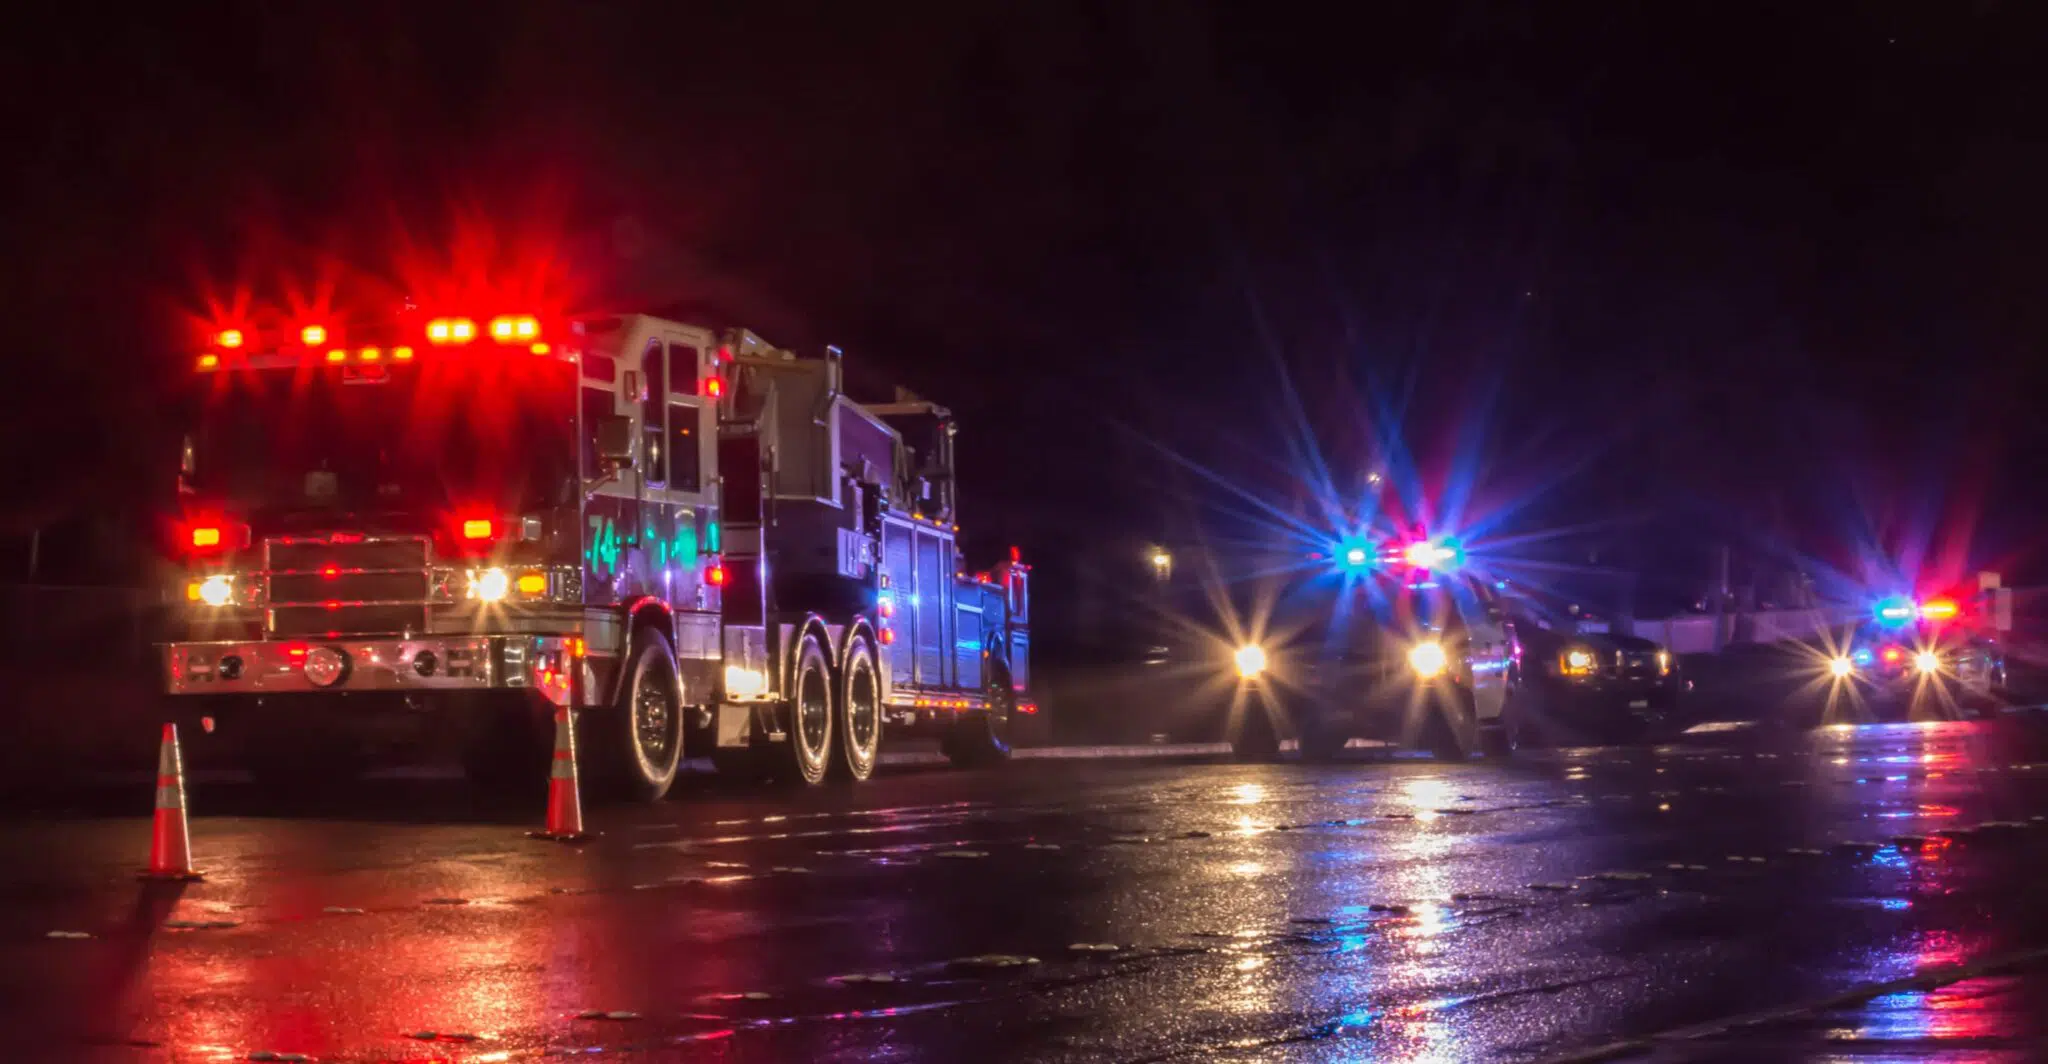 Fire trucks and emergency responder vehicles on a dar road on a rainy night.